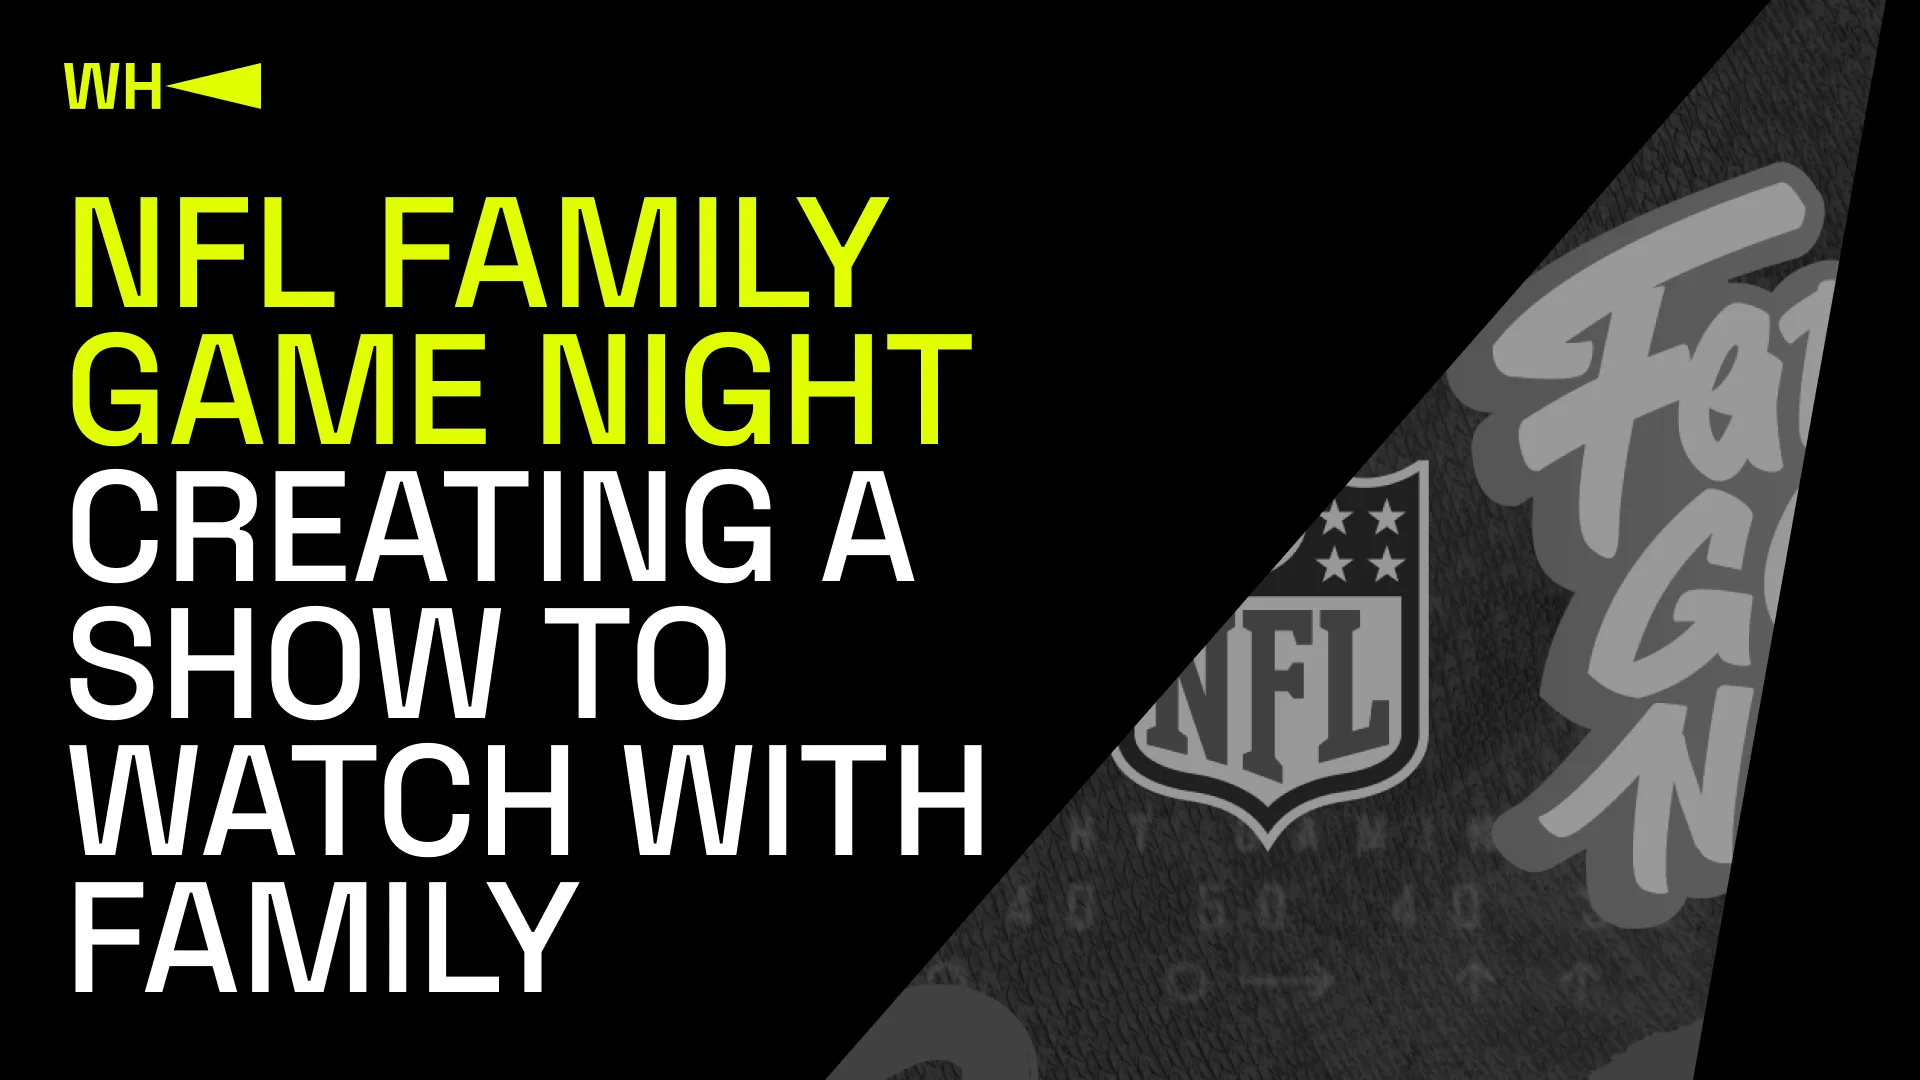 NFL Family Game Night: Creating a Show to Watch With Family